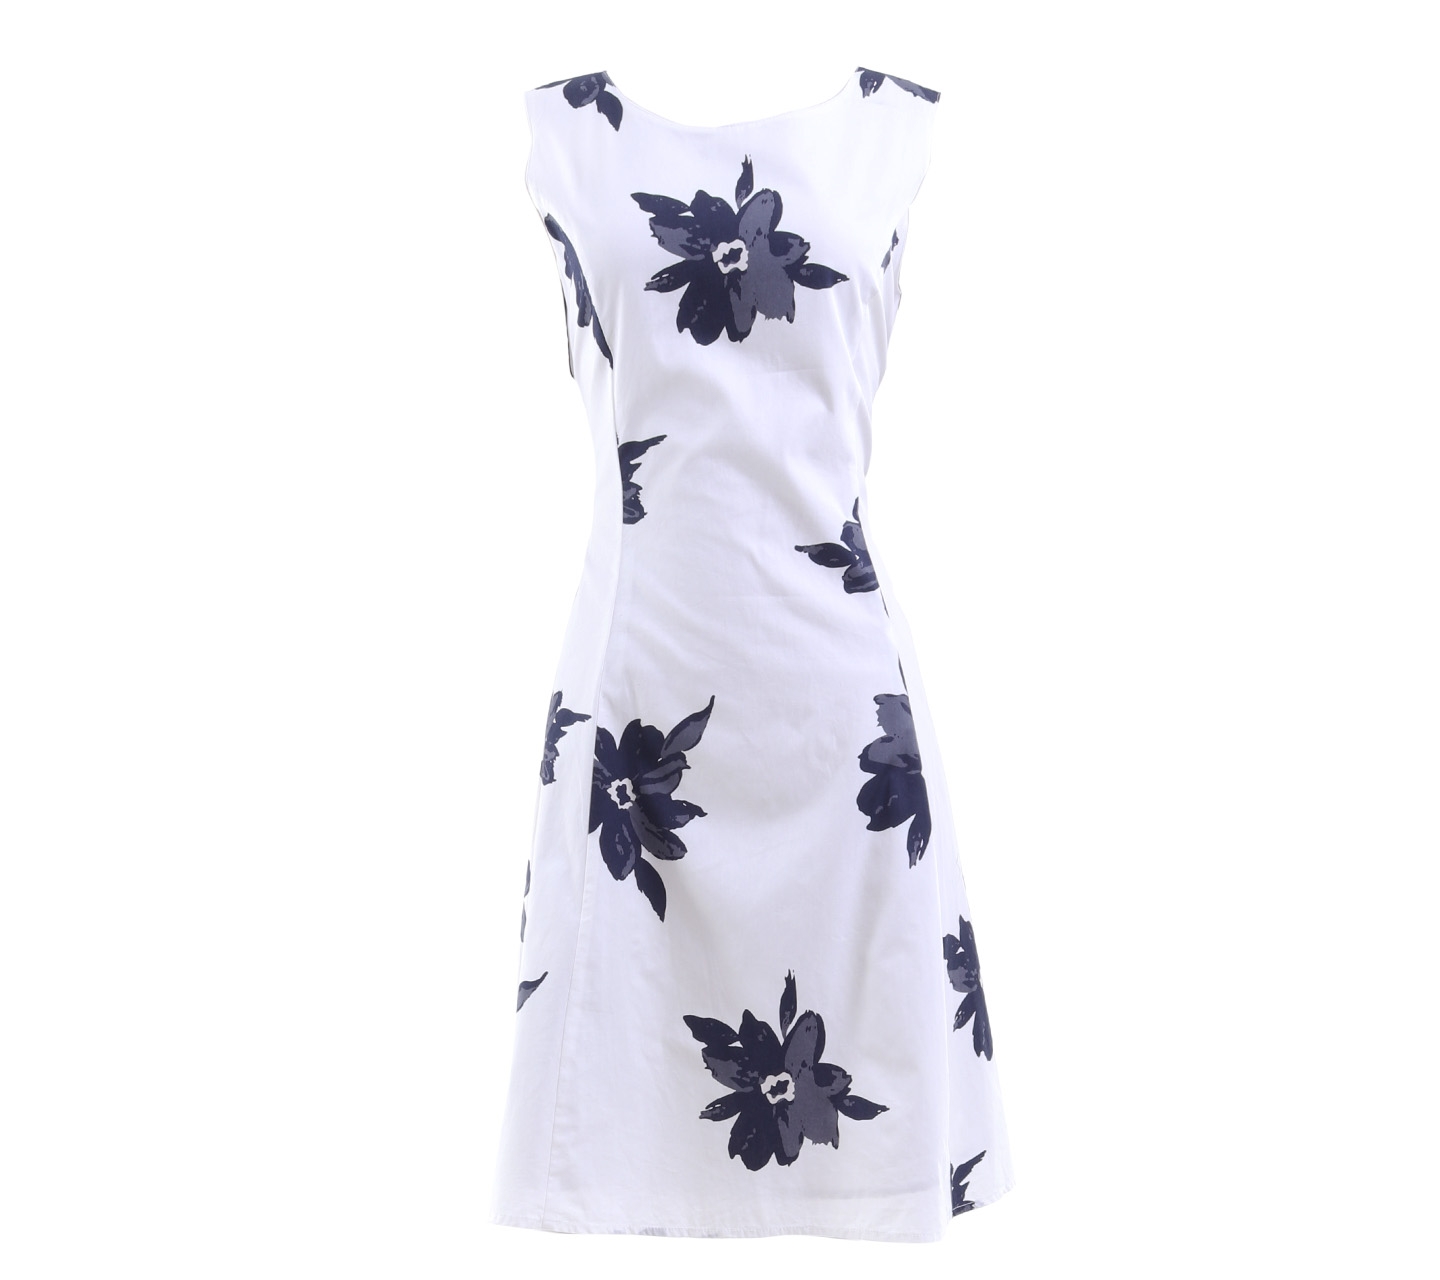 Roomy's Whpite & Black Floral With Strap Mini Dress